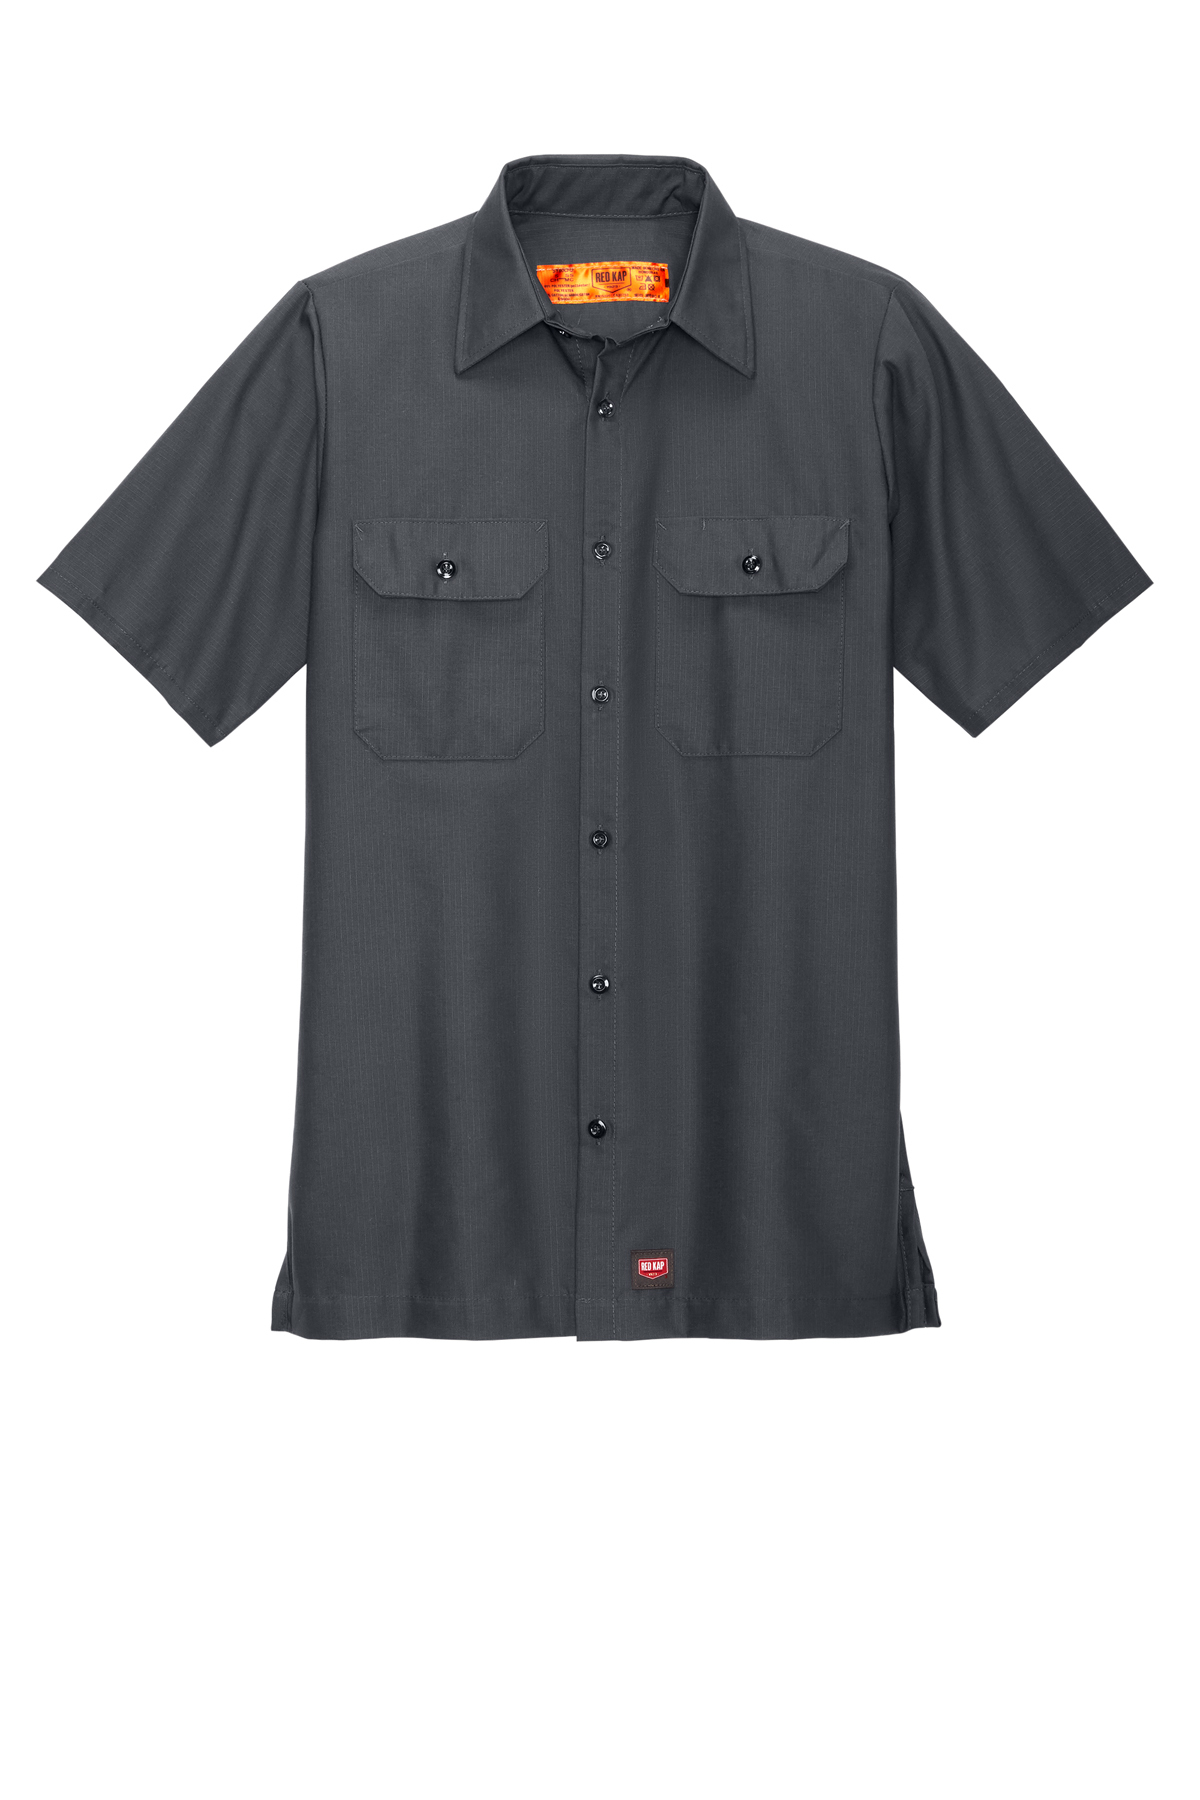 Red Kap ® Short Sleeve Solid Ripstop Shirt | Product | Company Casuals